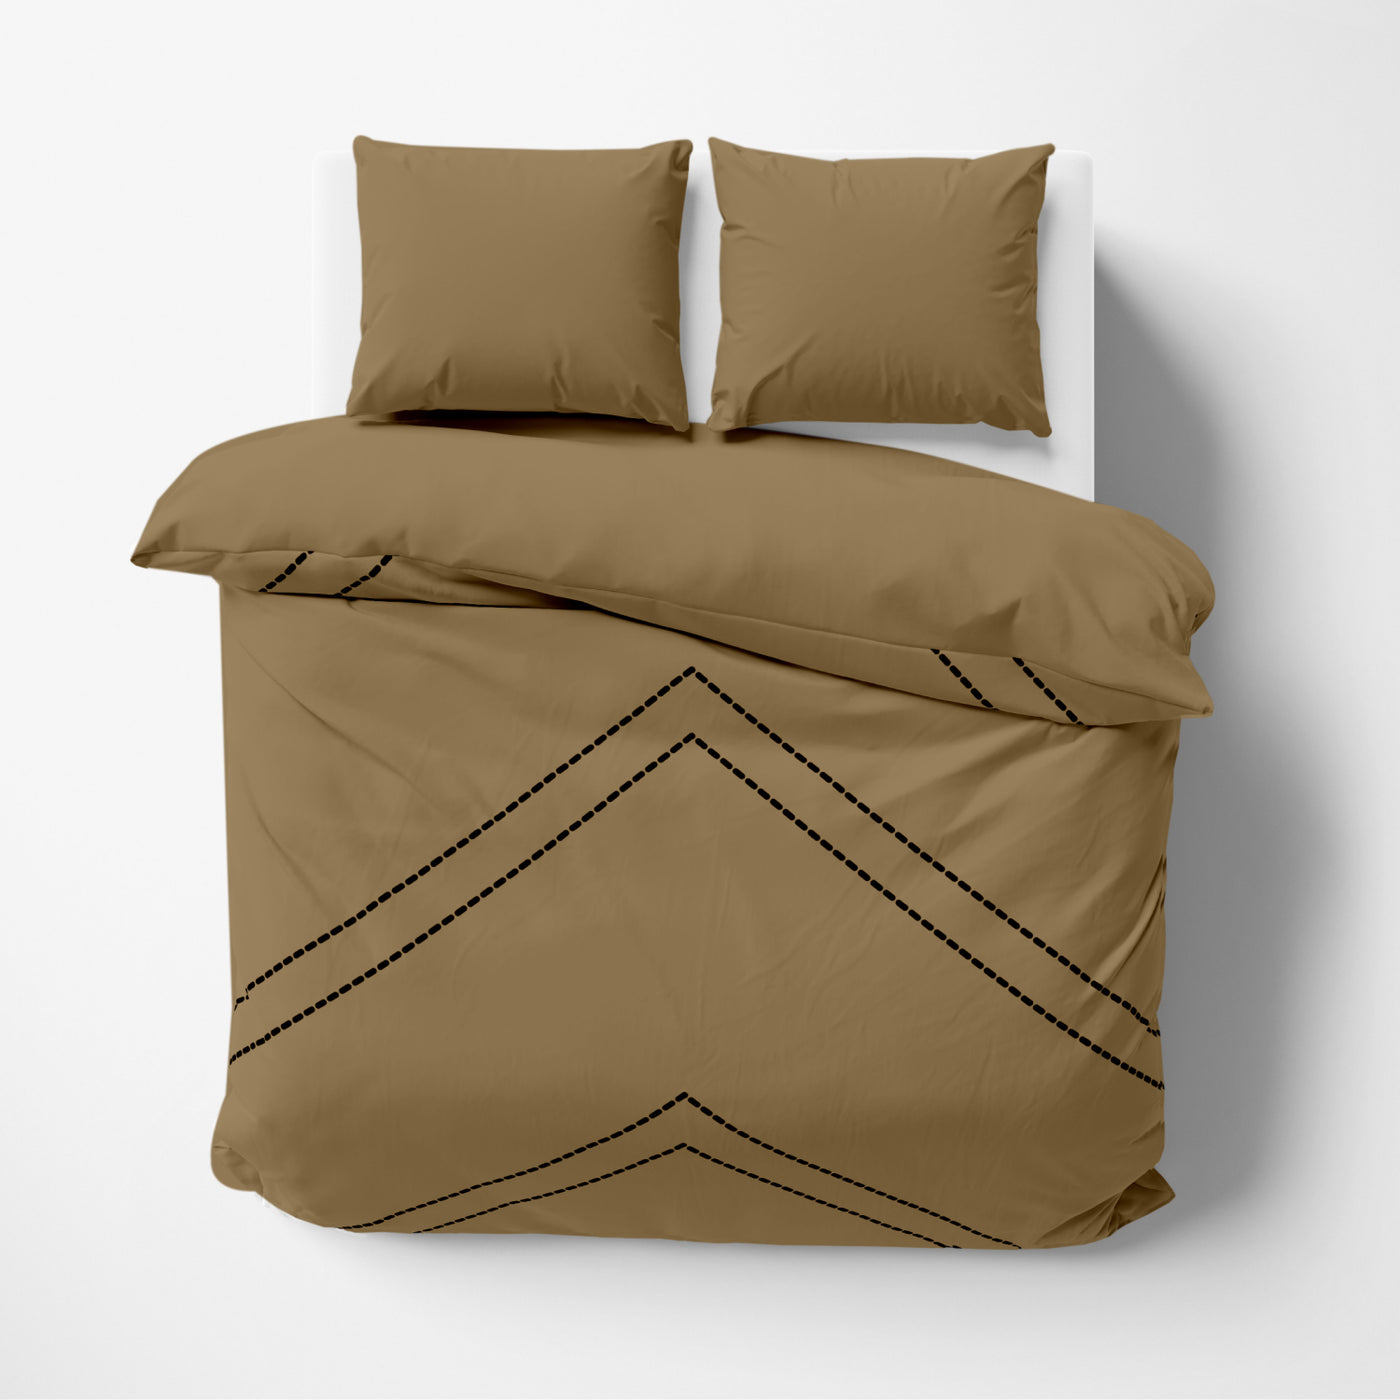 Buy Embroidered Arrow 3 Piece Duvet Cover Set Online at Kotton Culture USA